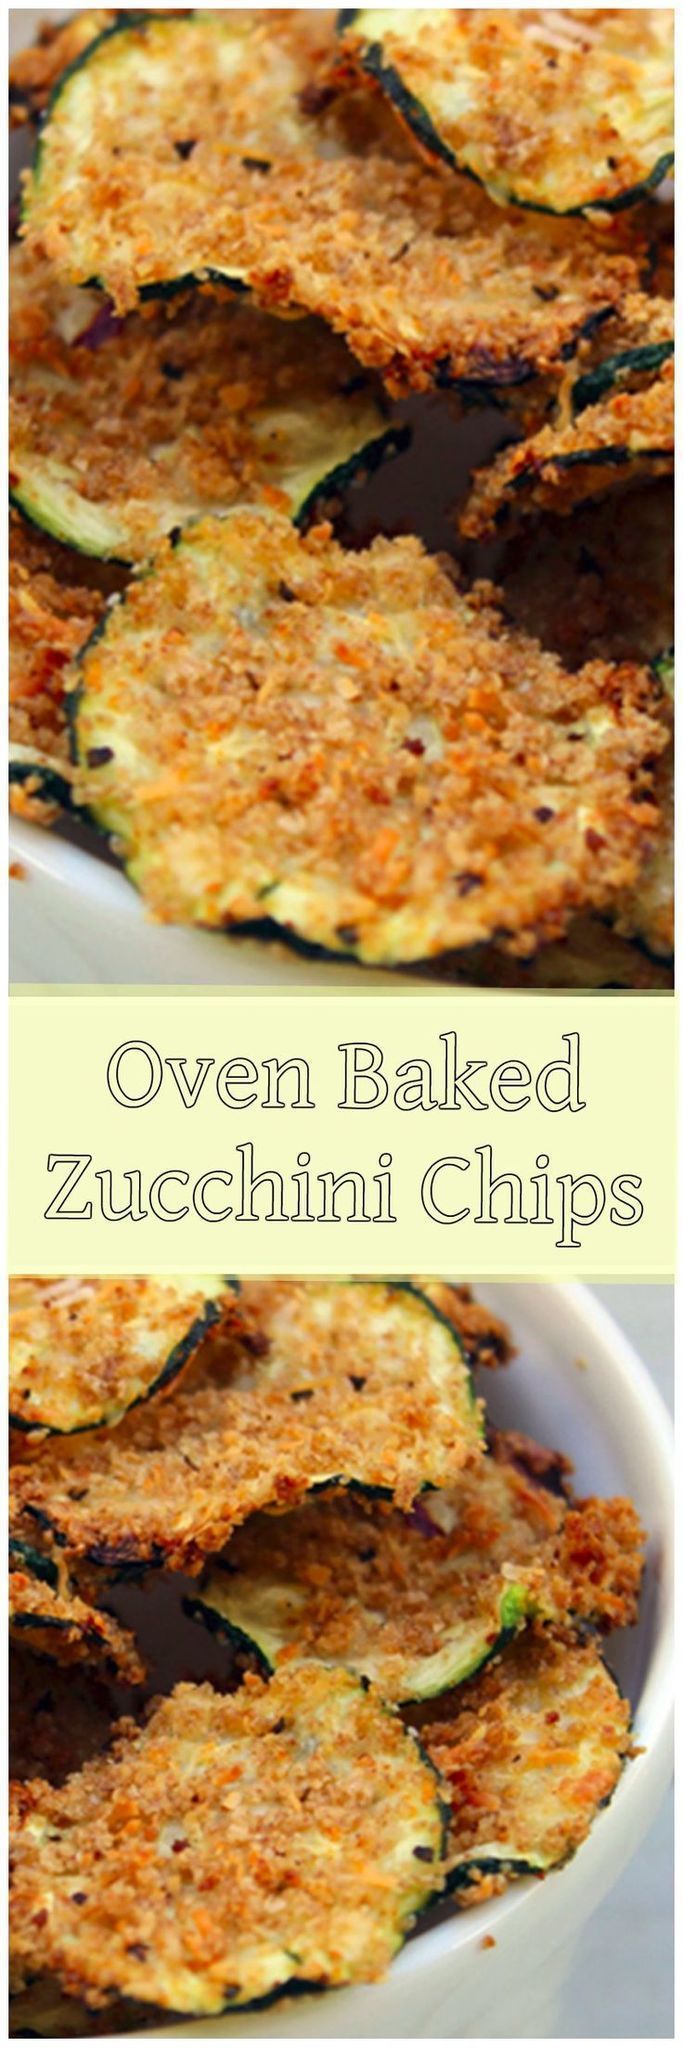 Crunchy chips don’t have to be sinful! These zucchini chips satisfy that craving a